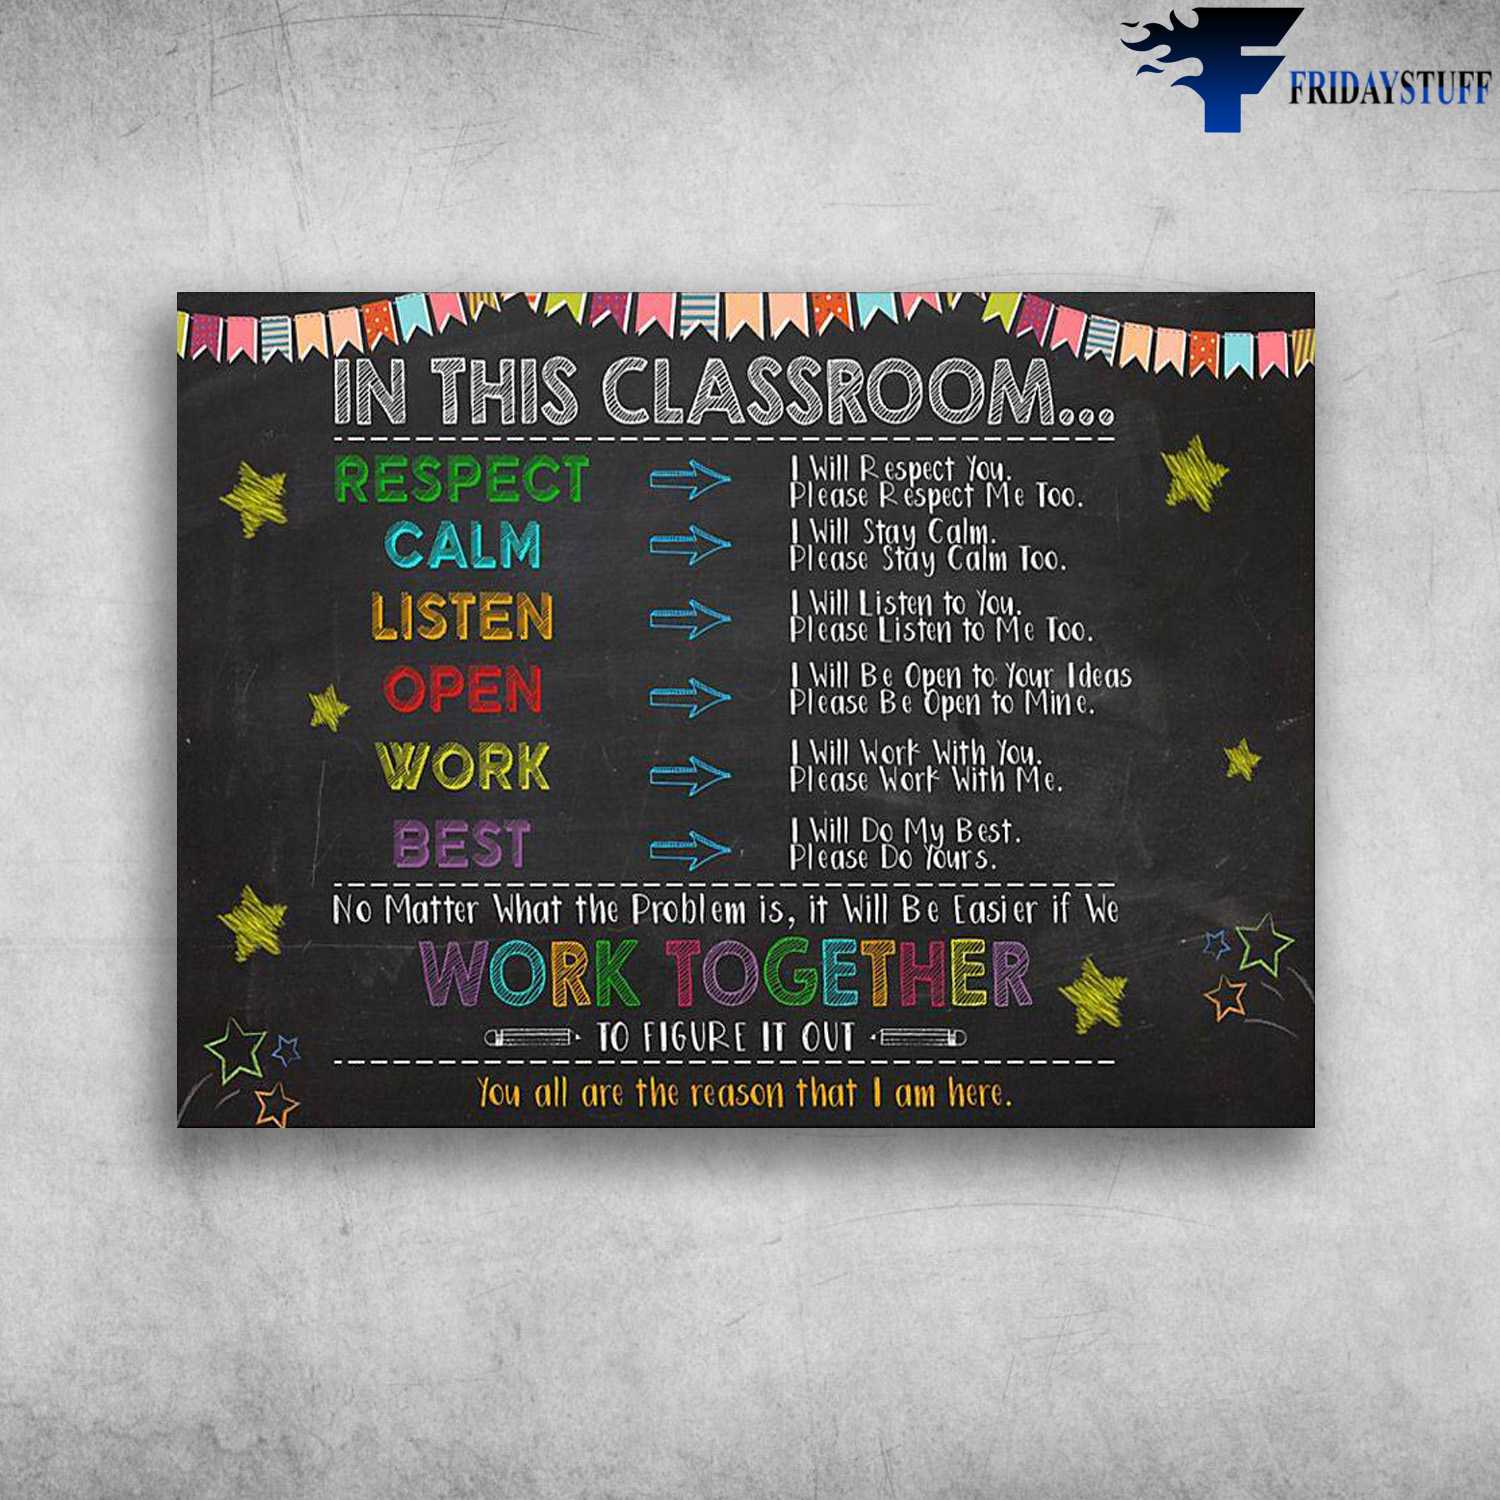 Classroom Rules - In This Classroom, I Will Respect You, I Will Calm, I Will Listen To You, I Will Open To You, I Will Rork With You, I Will Do My Best, No Matter What he Problem Em Is, Work Together